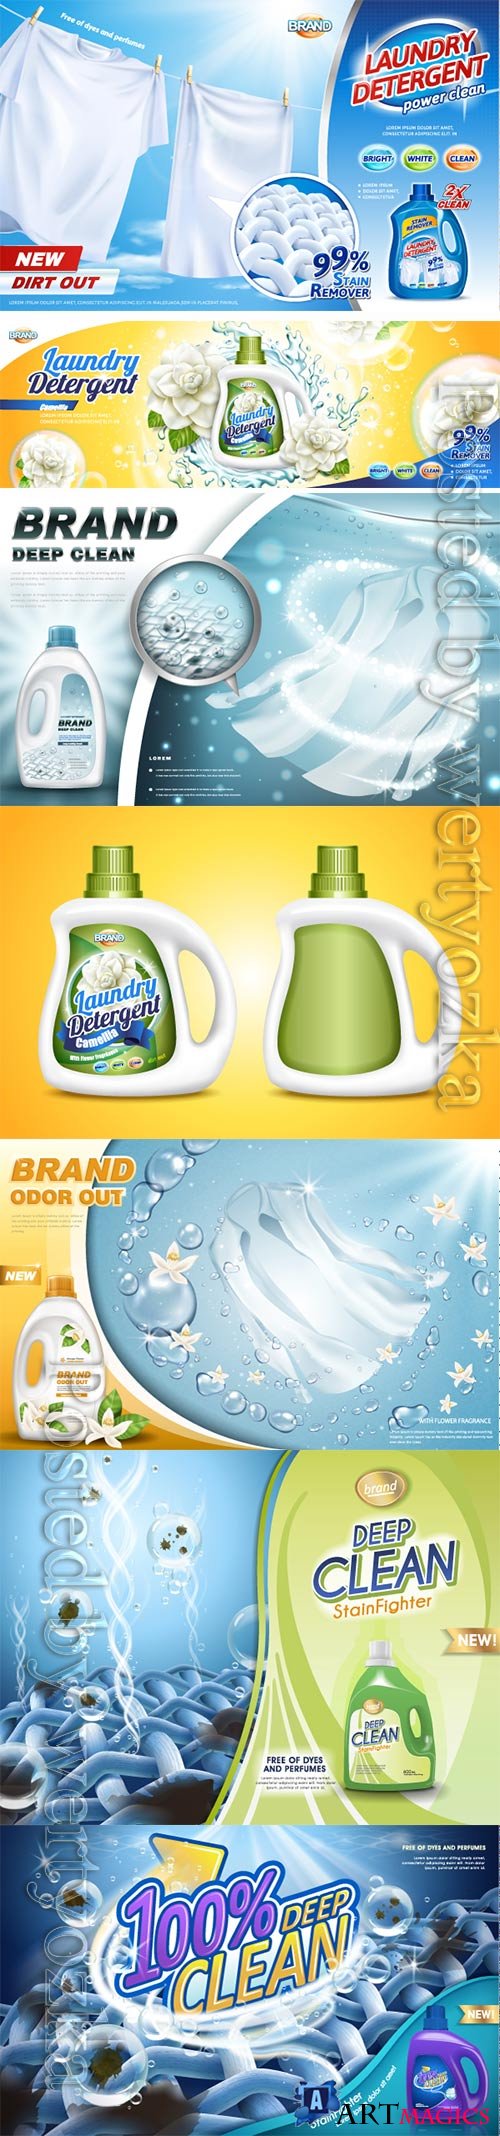 Laundry detergent ads vector collection